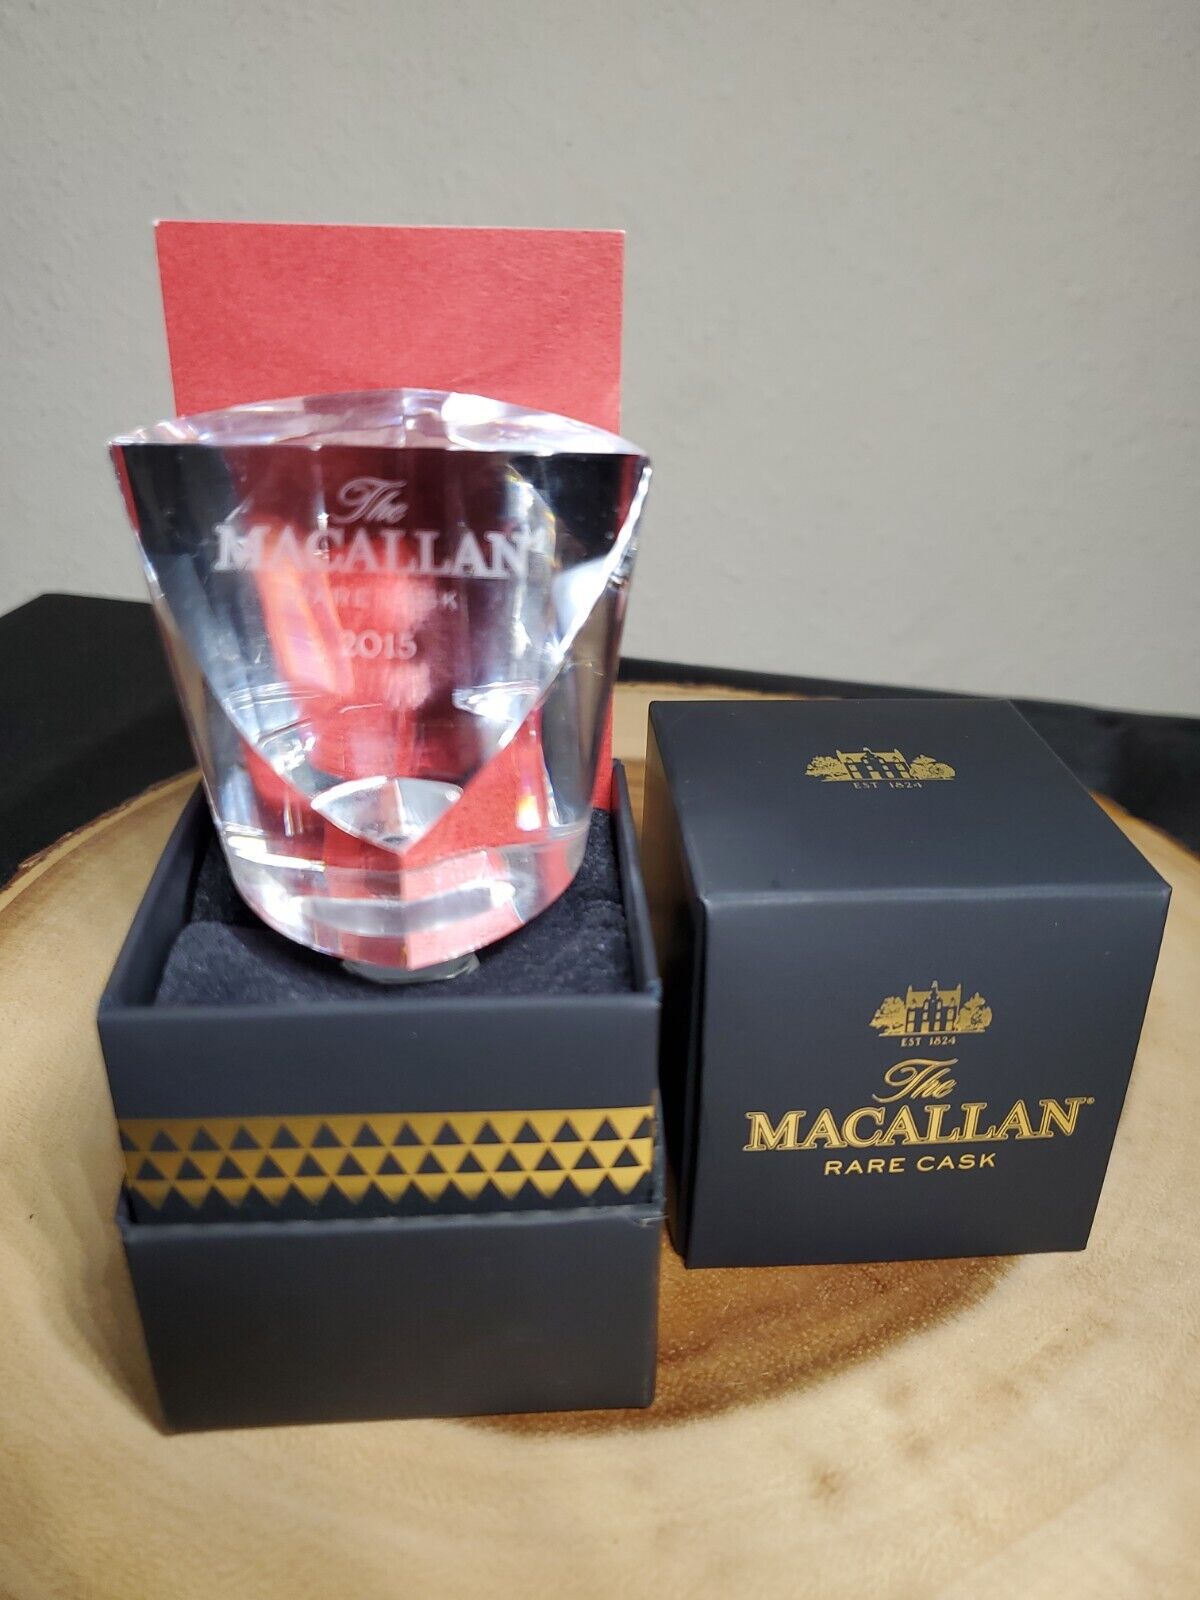 2015 Macallan Crystal Rare Cask Bottle Stopper Whiskey Scotch collectible top 